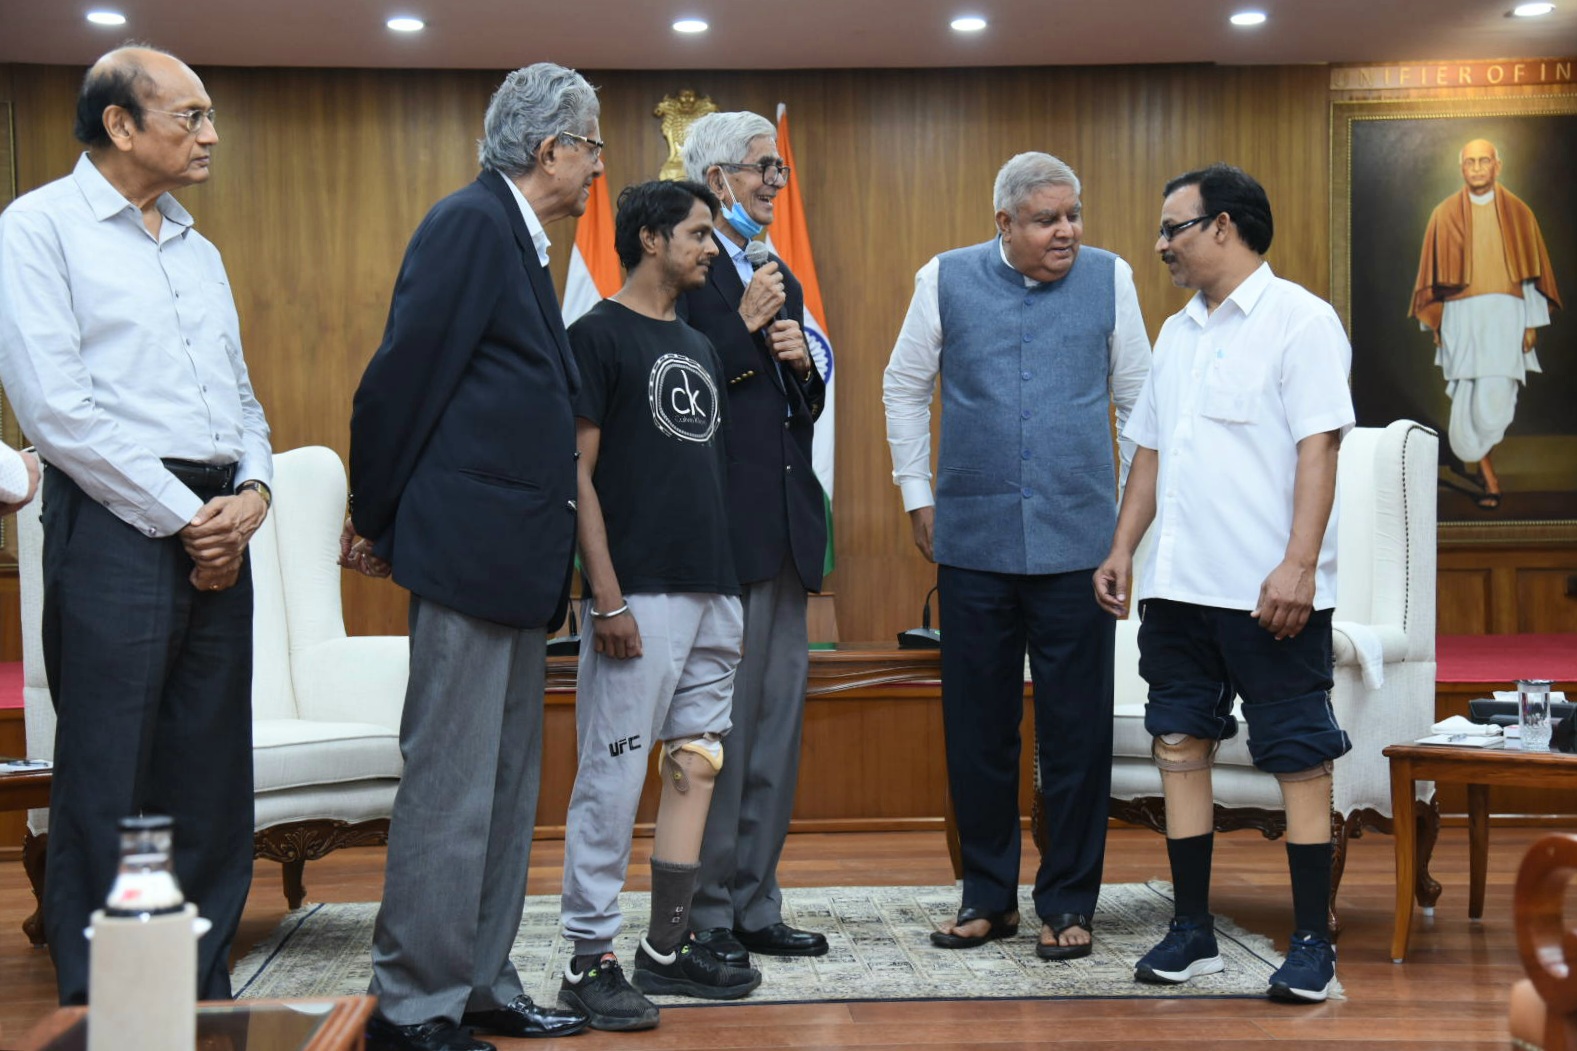 Vice President flags off Jaipur Foot team to Syria to provide artificial limbs to amputees